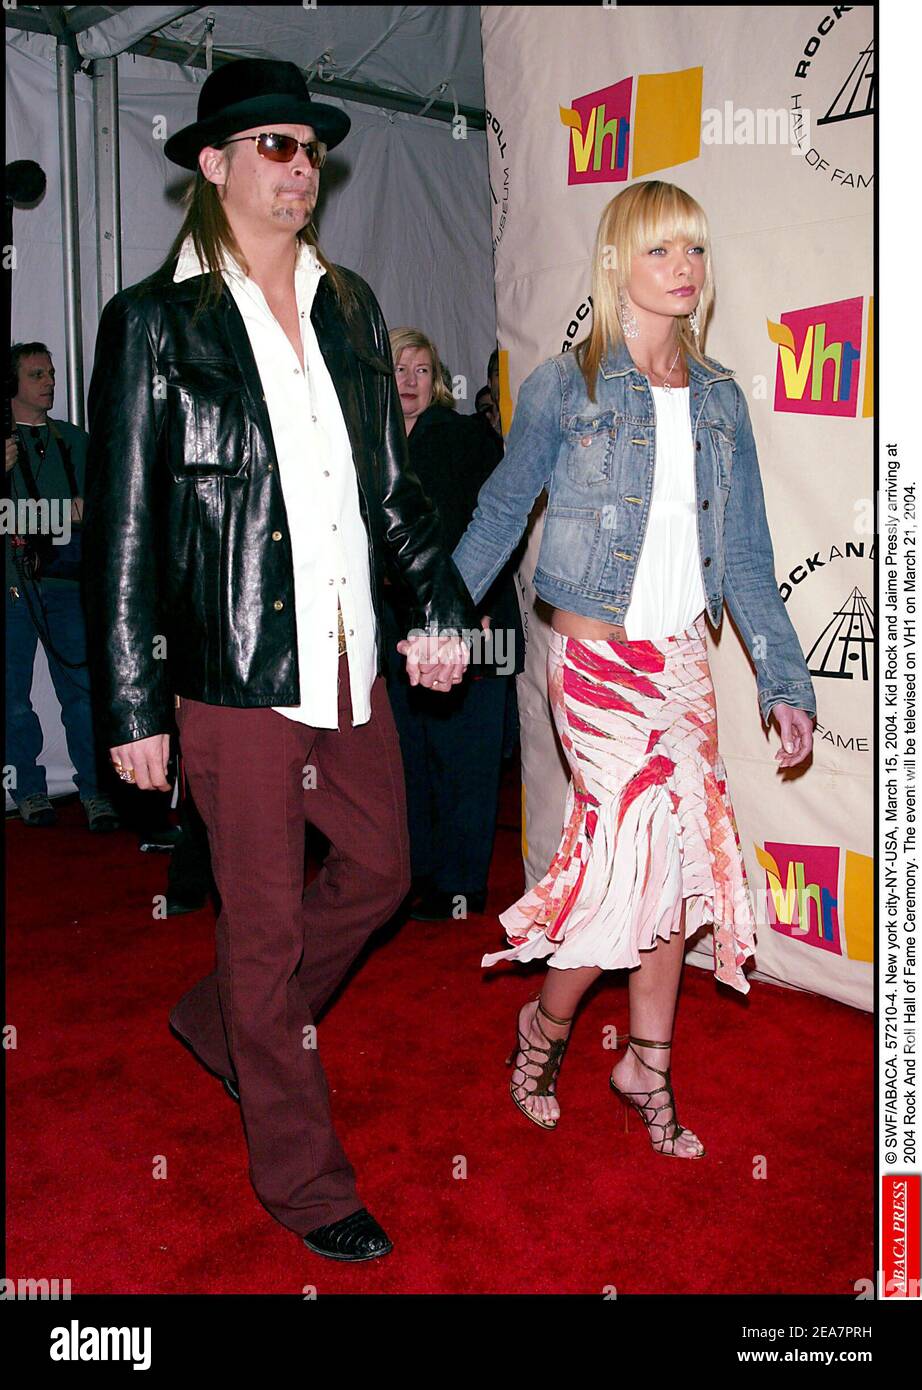 © SWF/ABACA. 57210-4. New york city-NY-USA, March 15, 2004. Kid Rock and Jaime Pressly arriving at 2004 Rock And Roll Hall of Fame Ceremony. The event will be televised on VH1 on March 21, 2004. Stock Photo